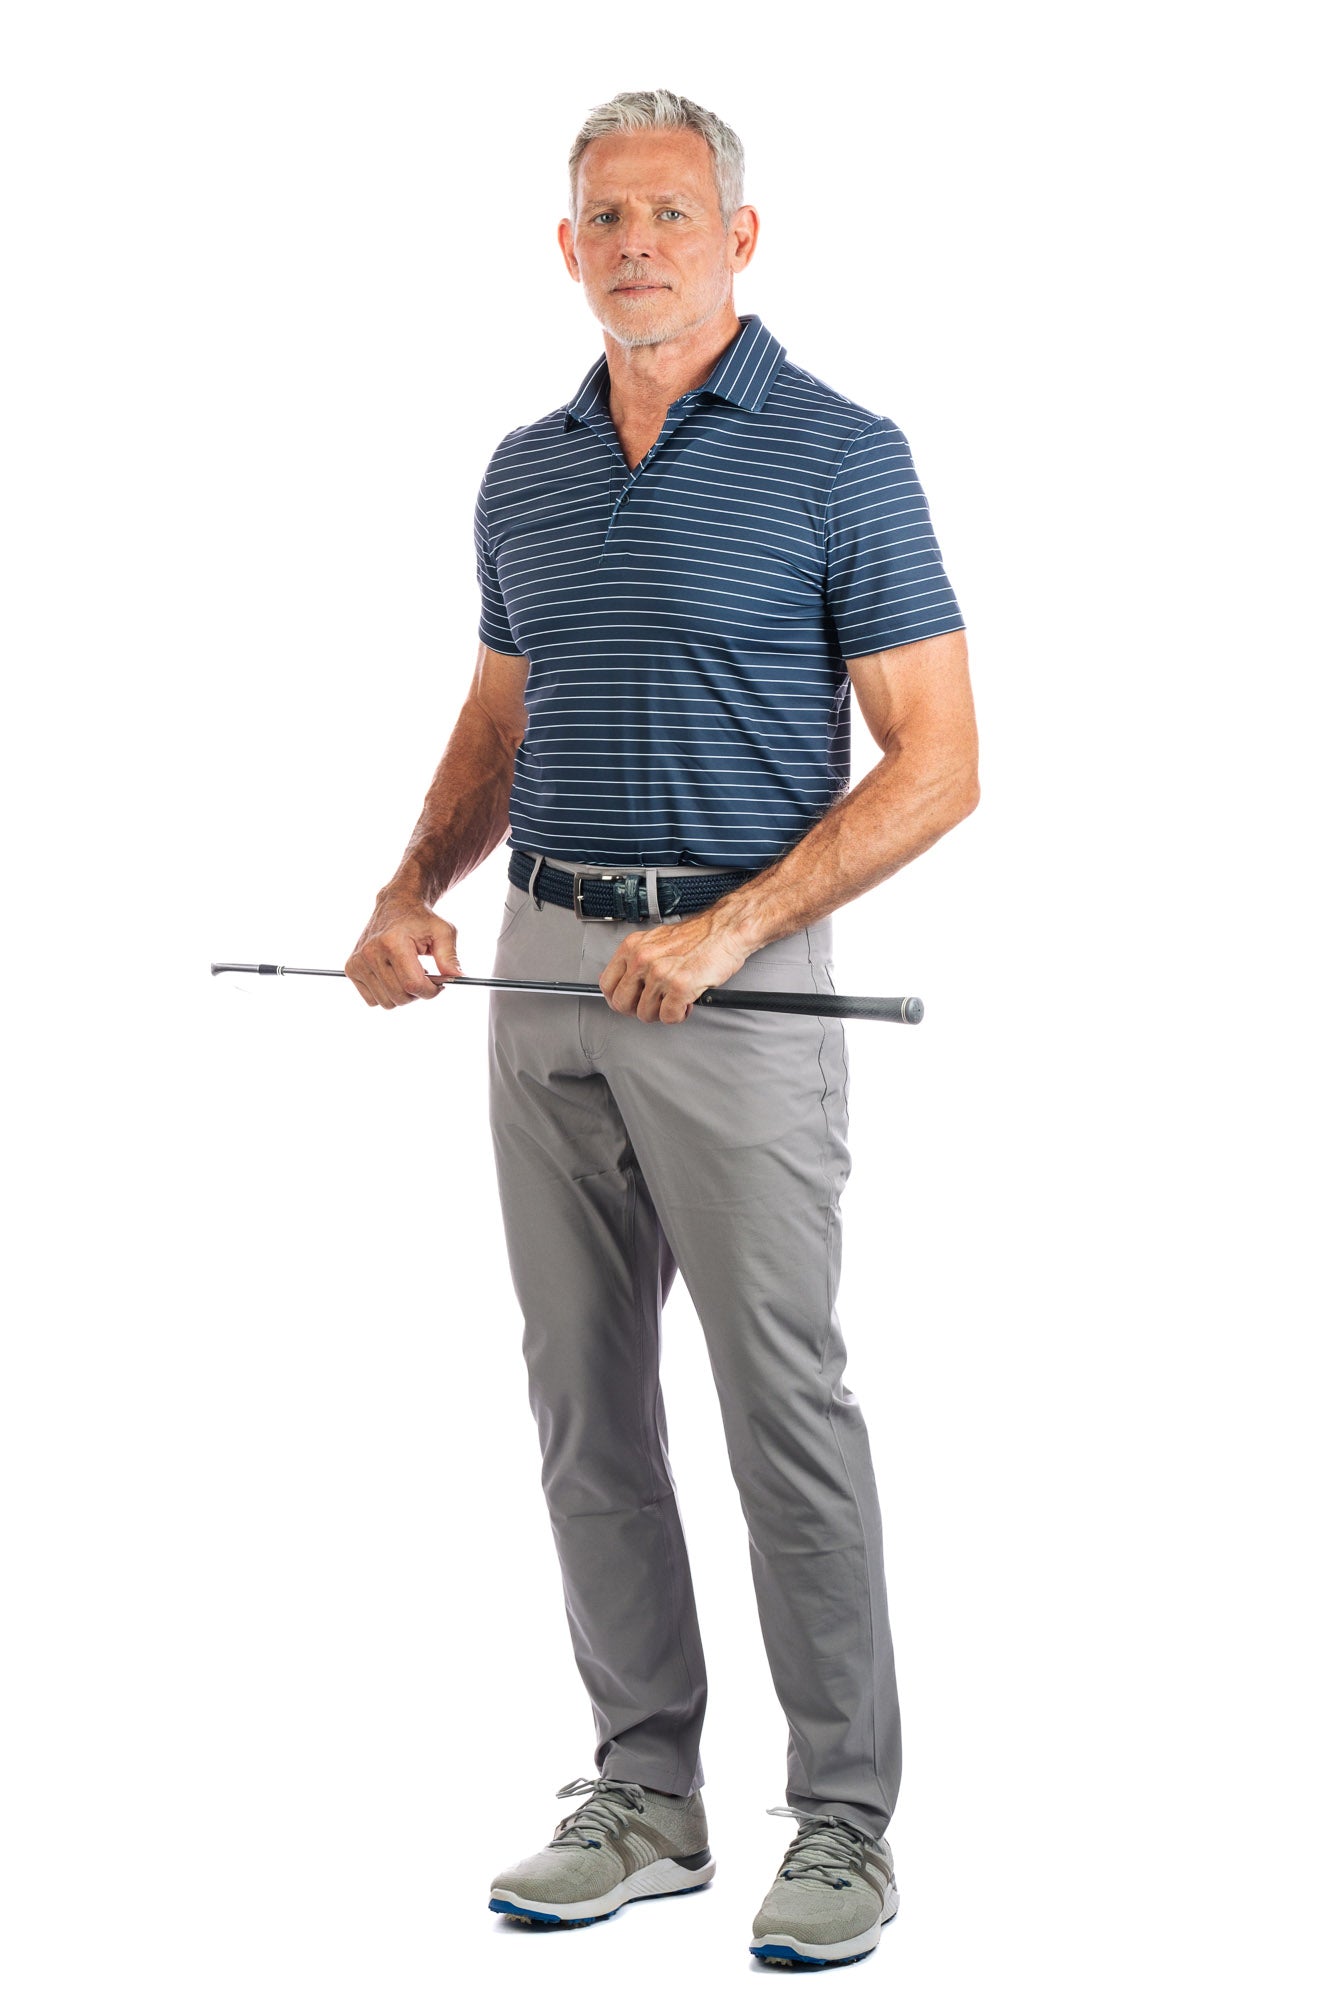 A model posing in a navy striped golf polo and grey pants, holding a golf club in both hands.